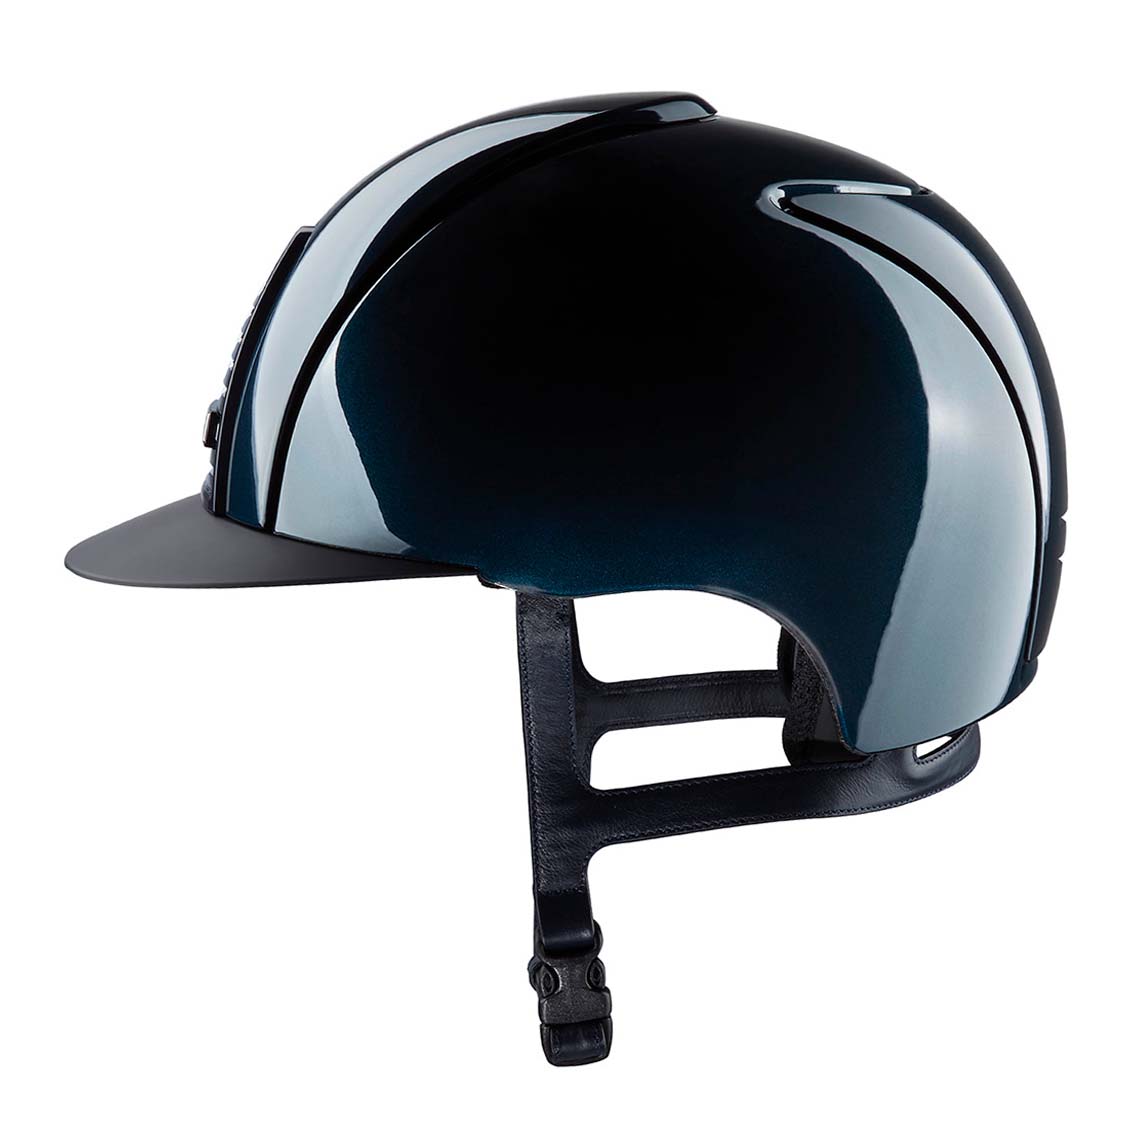 Kep riding helmet with removable peak